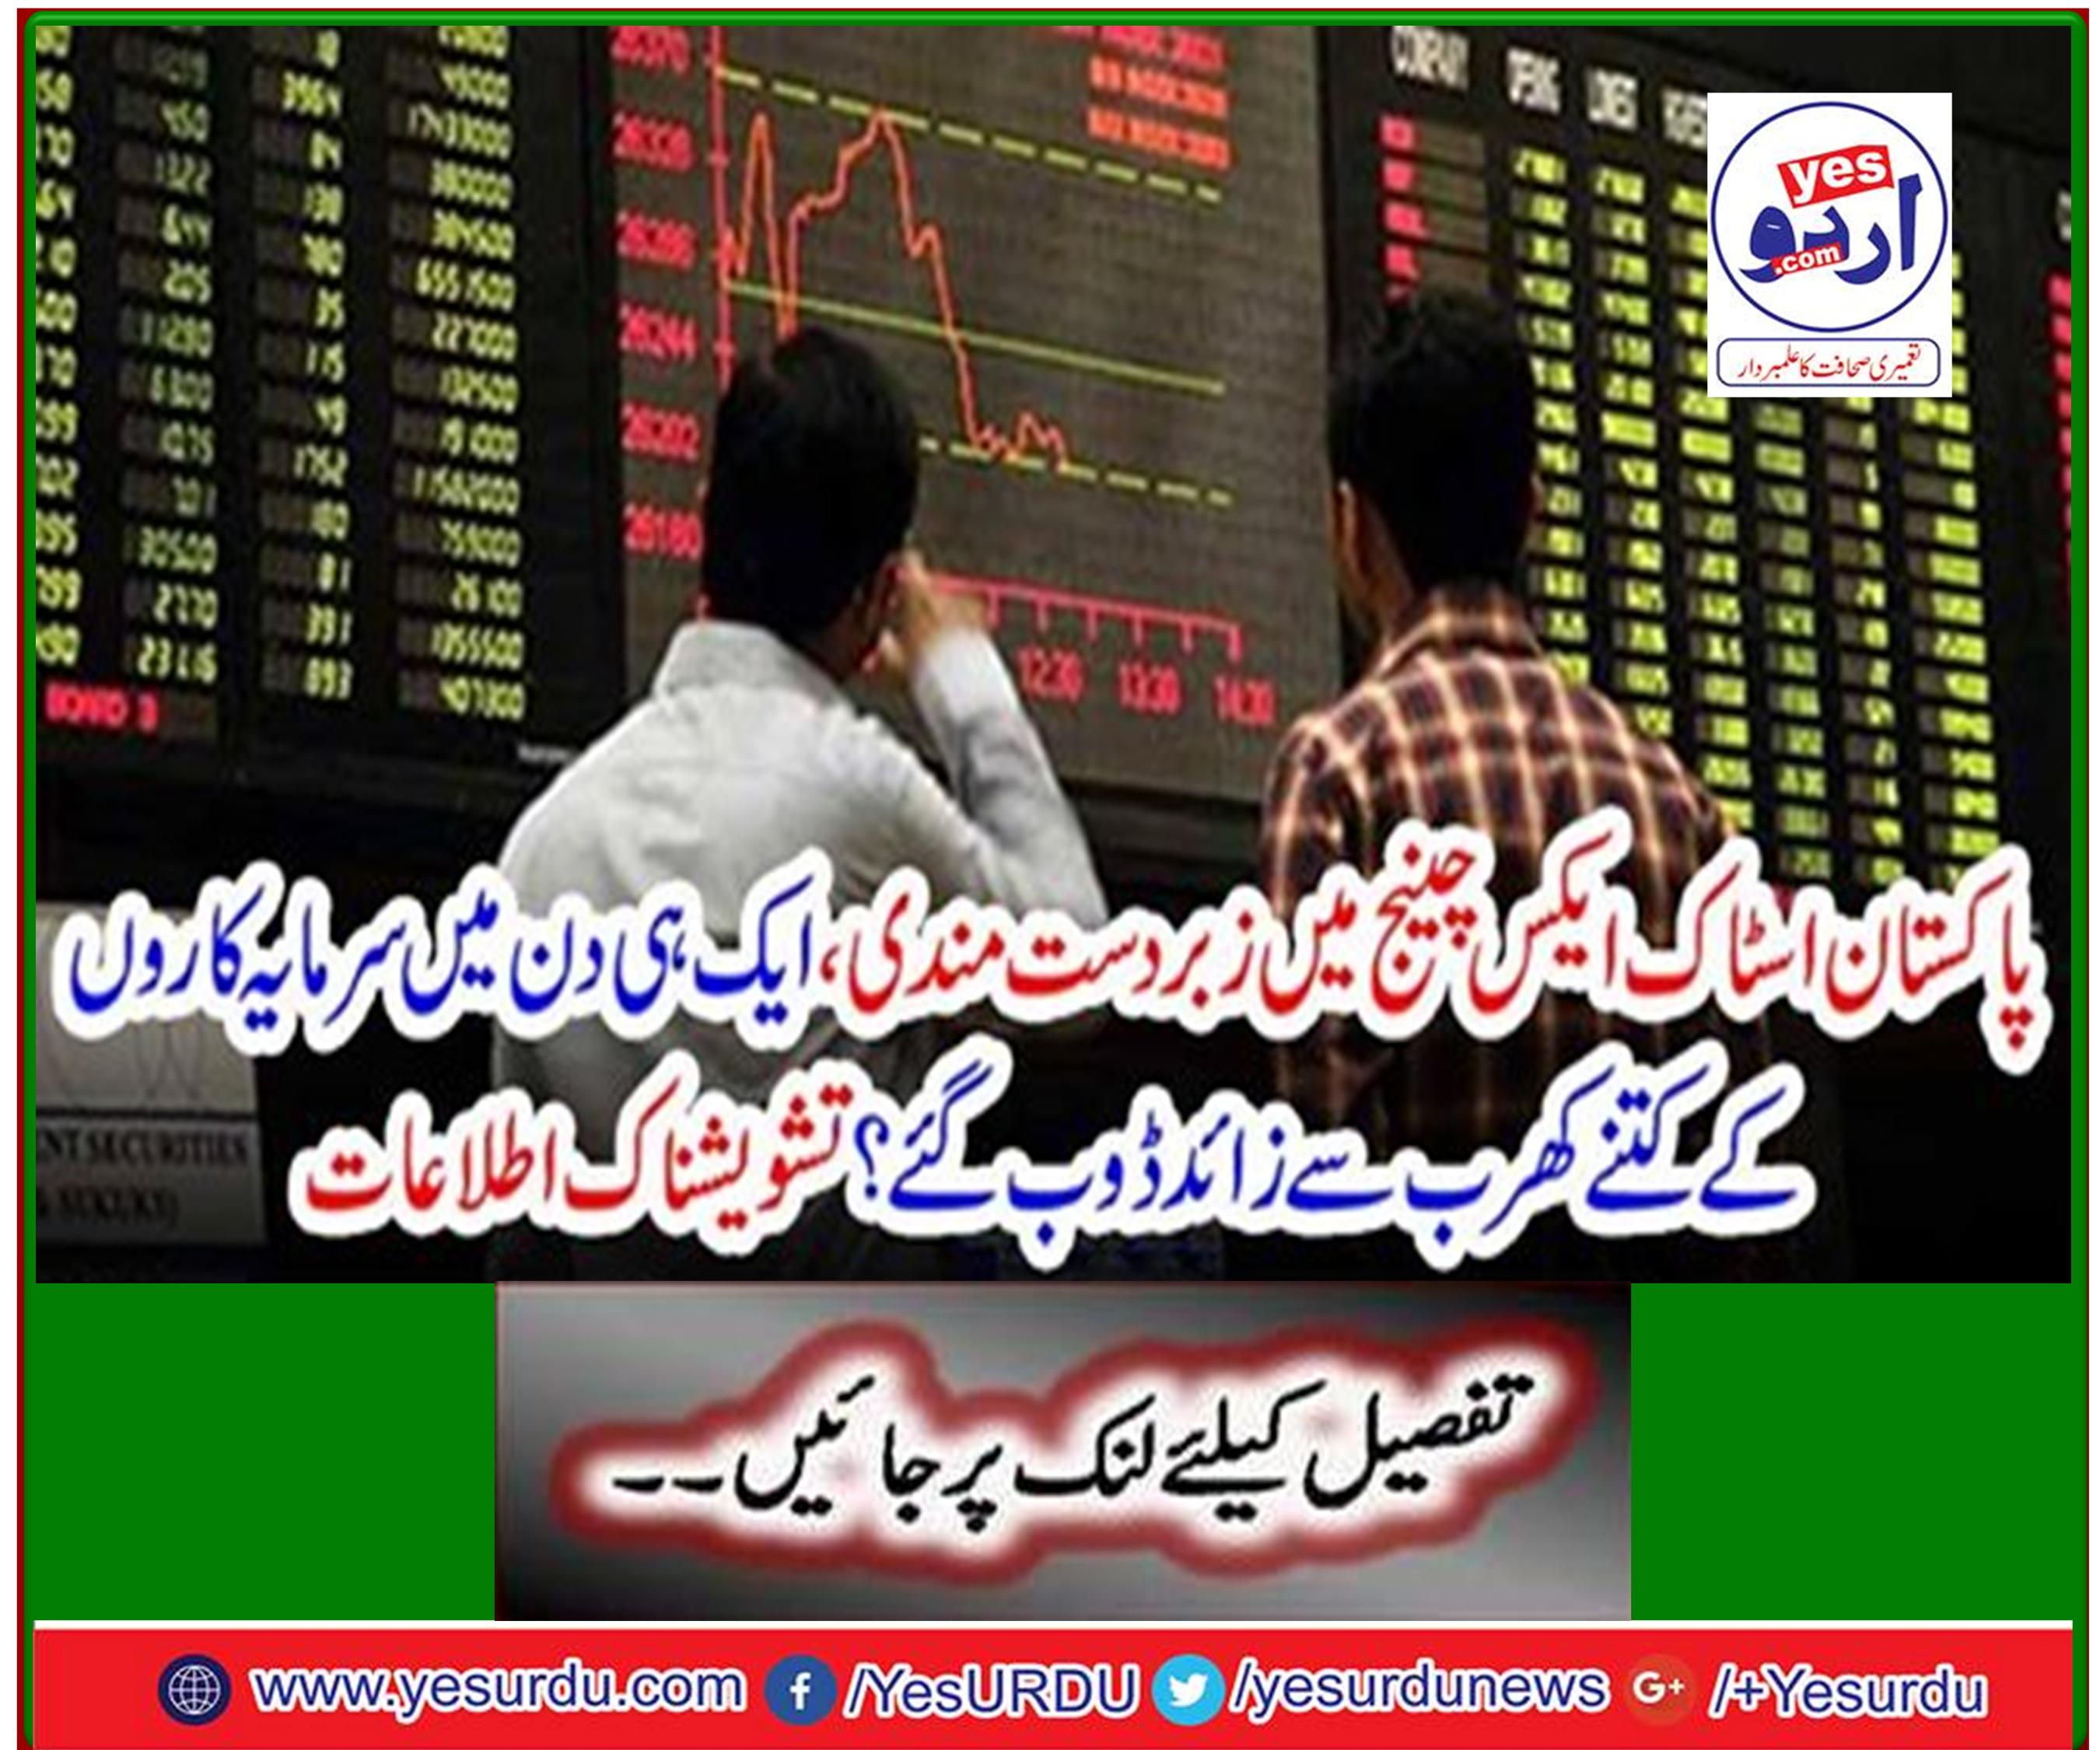 Tremendous downturn in Pakistan Stock Exchange, how many trillions of investors sank in a single day? Annoying notifications